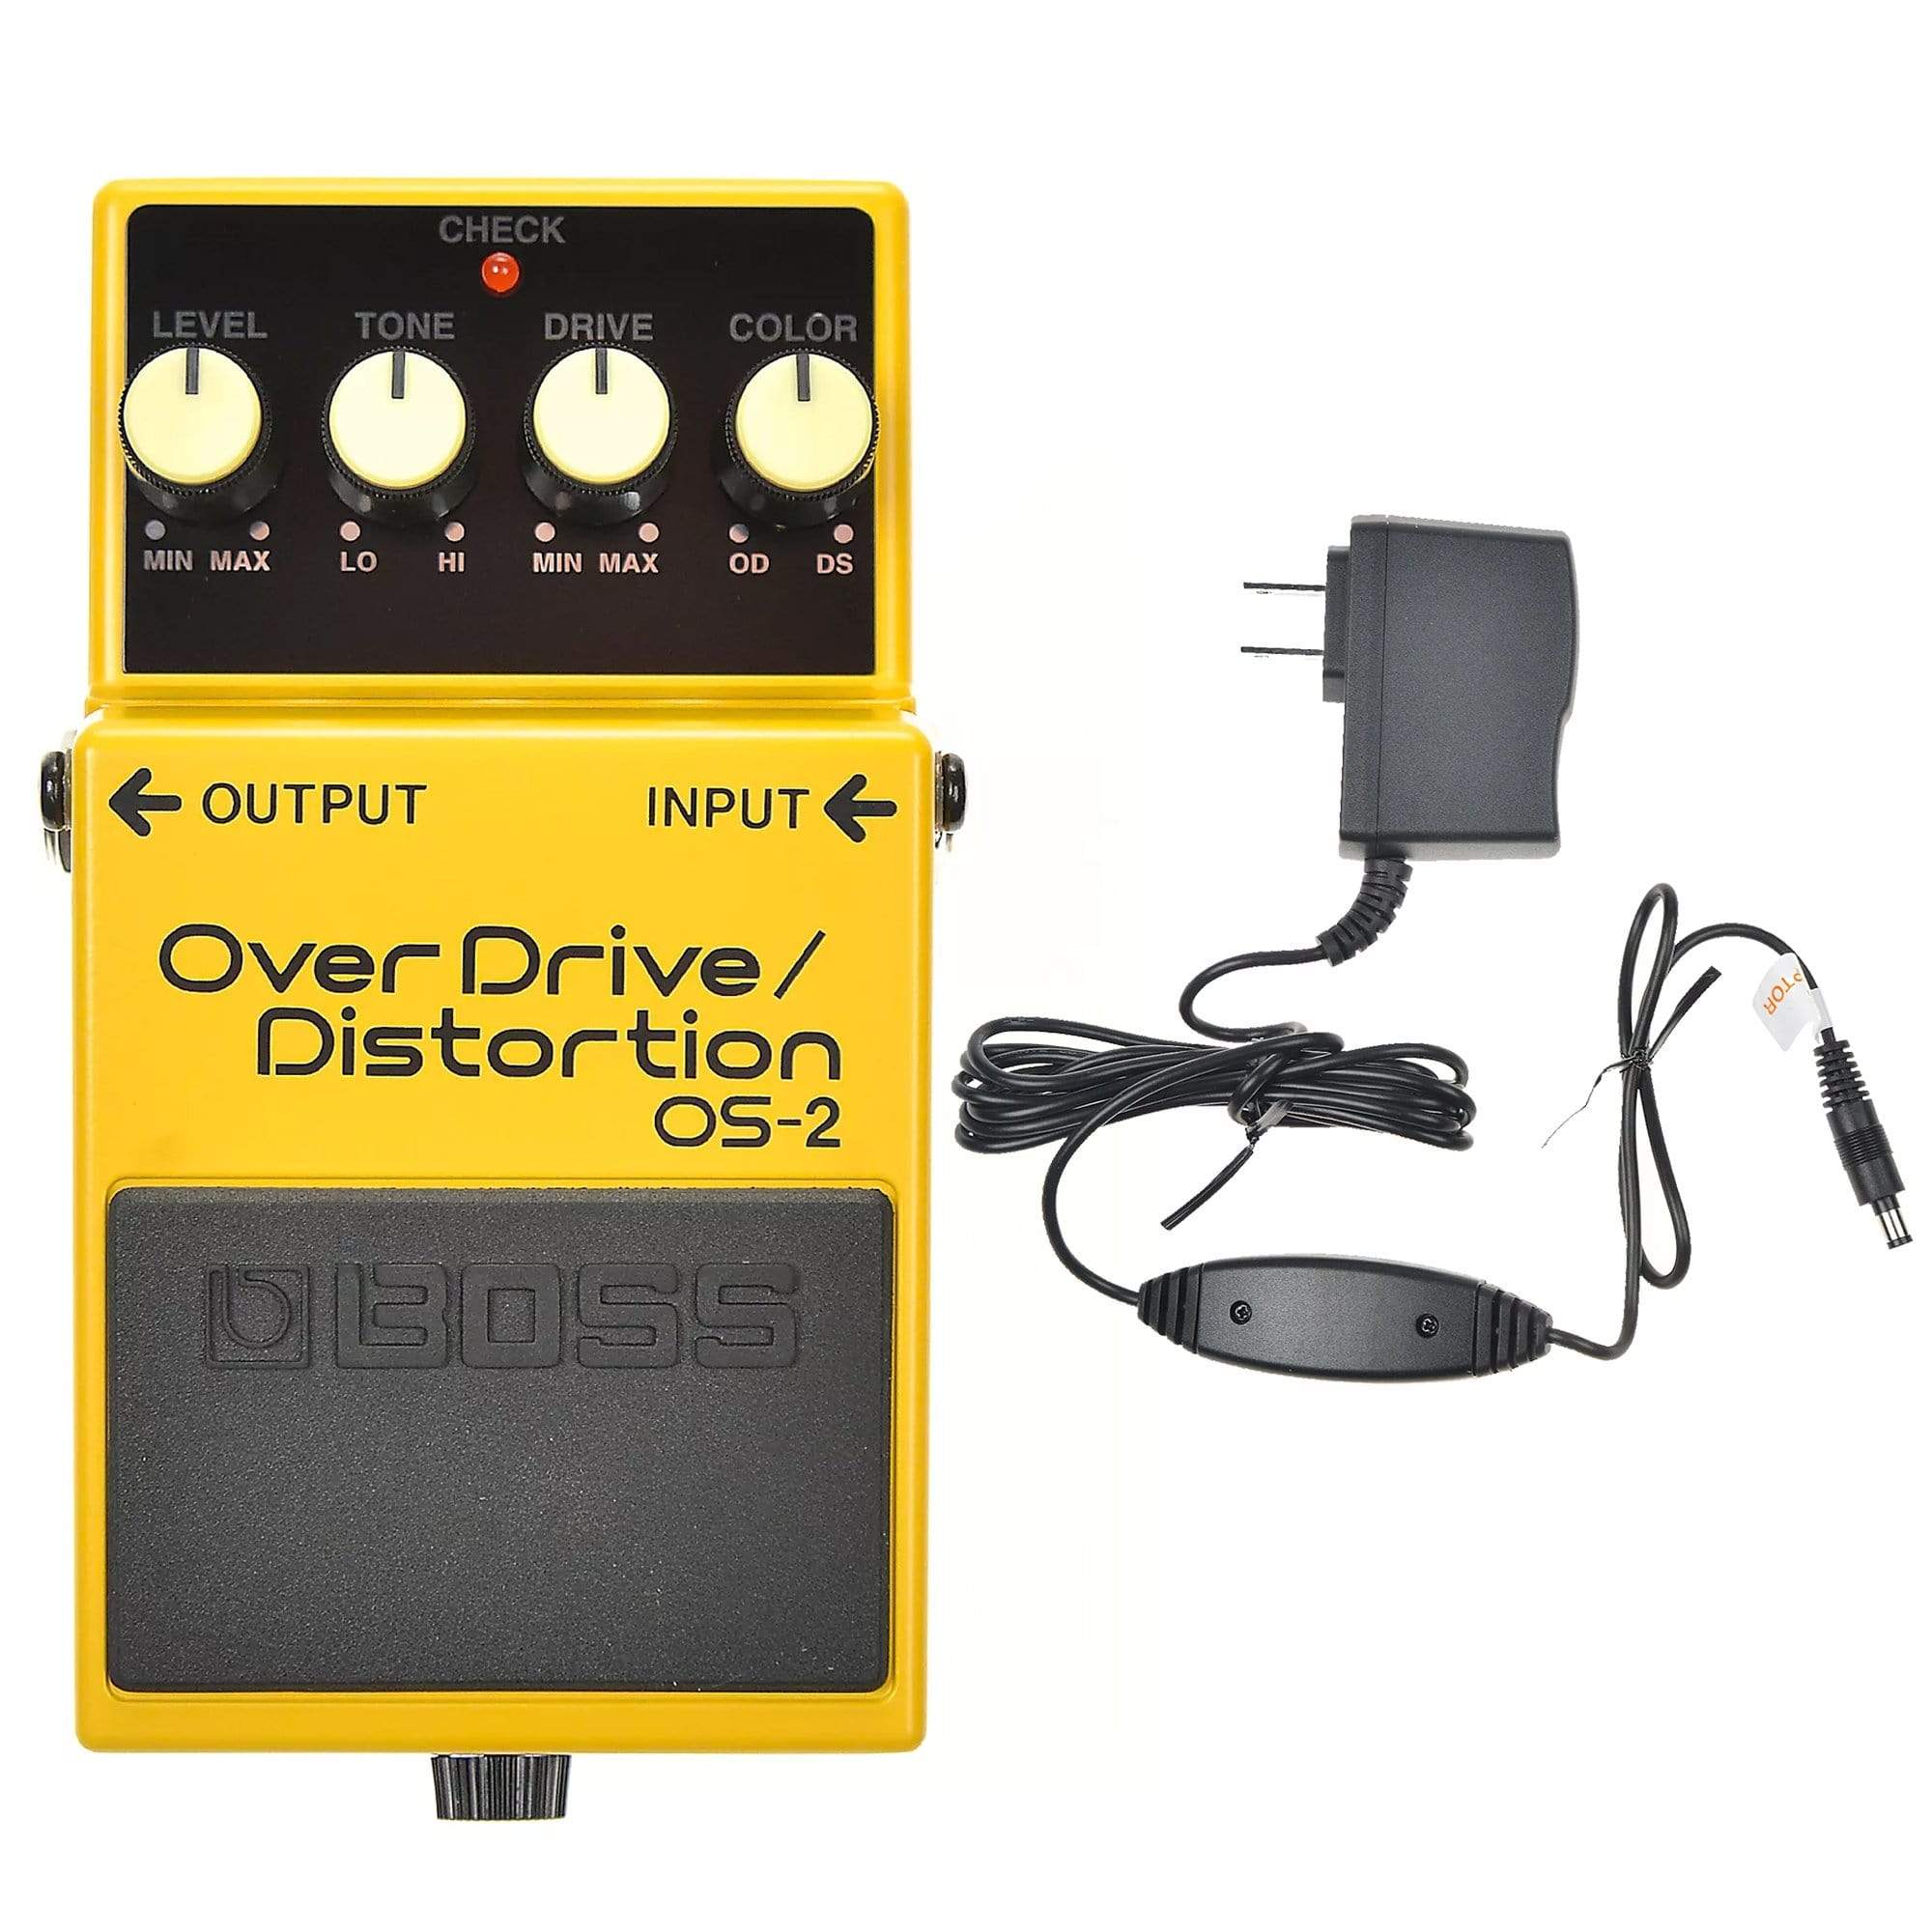 Boss OS-2 Overdrive/Distortion Bundle w/ Boss PSA-120S2 Power Supply –  Chicago Music Exchange